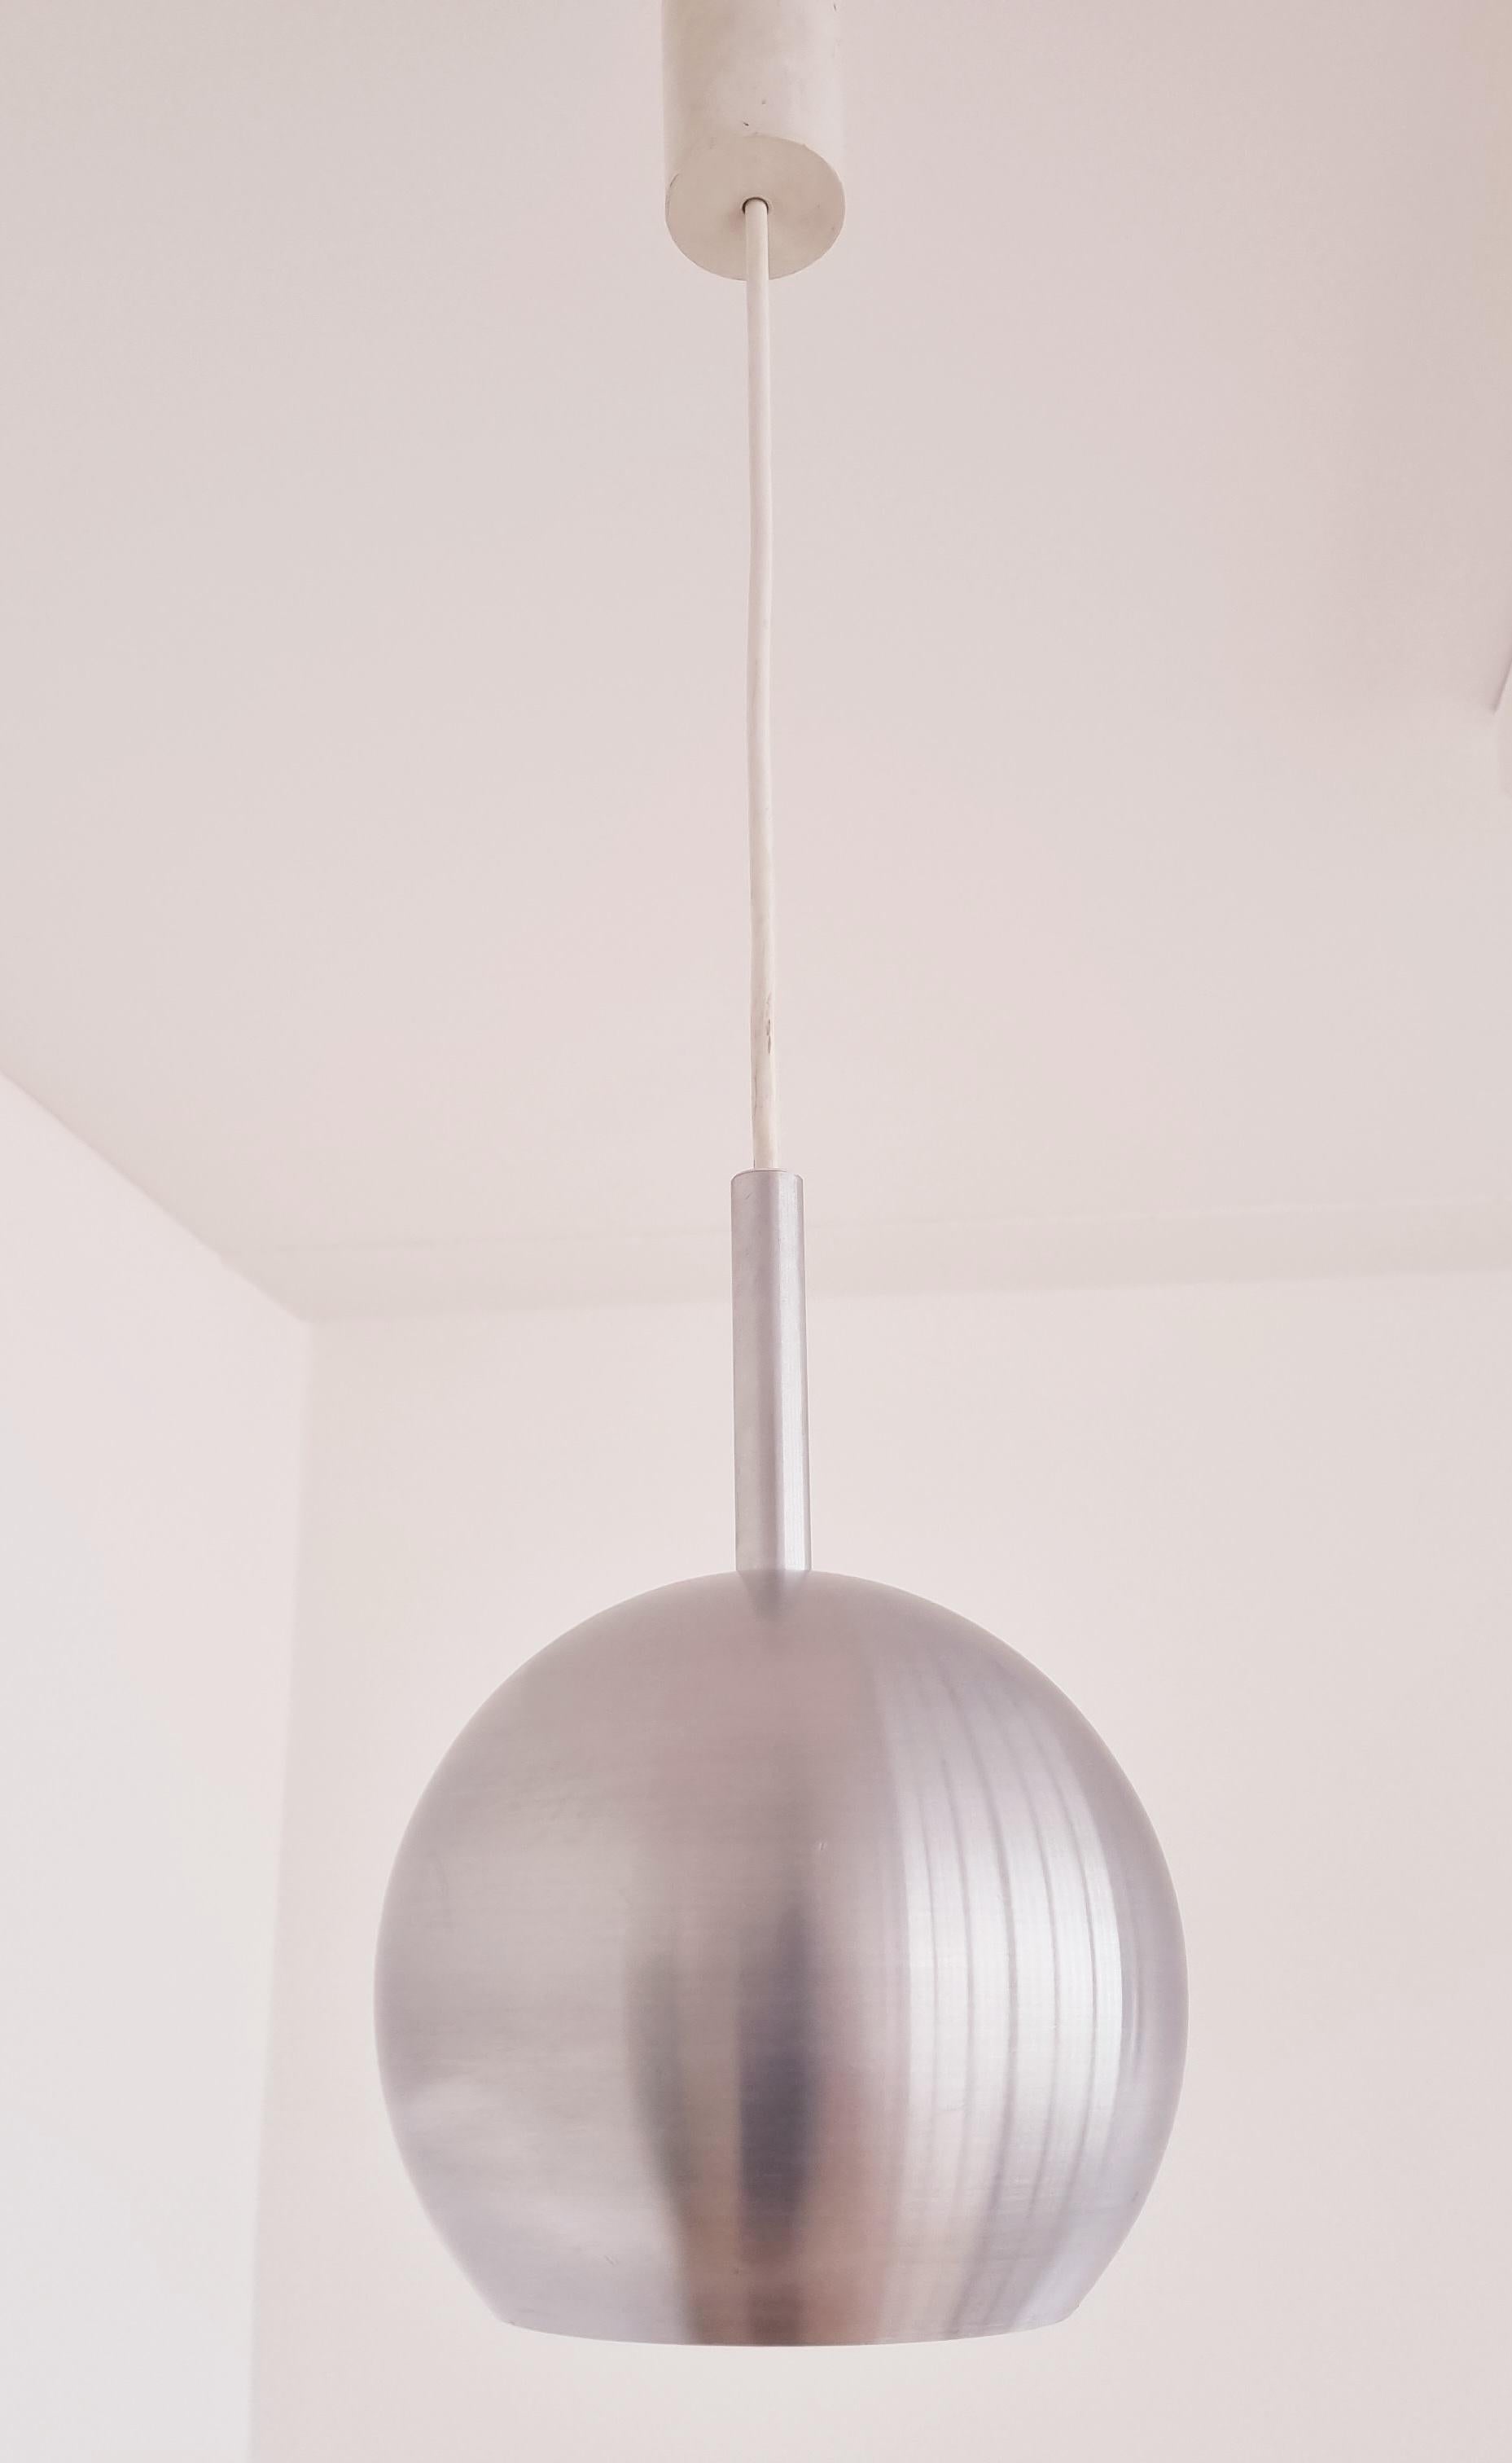 Midcentury Design Ball Pendant ERCO, Germany, 1970s For Sale 1